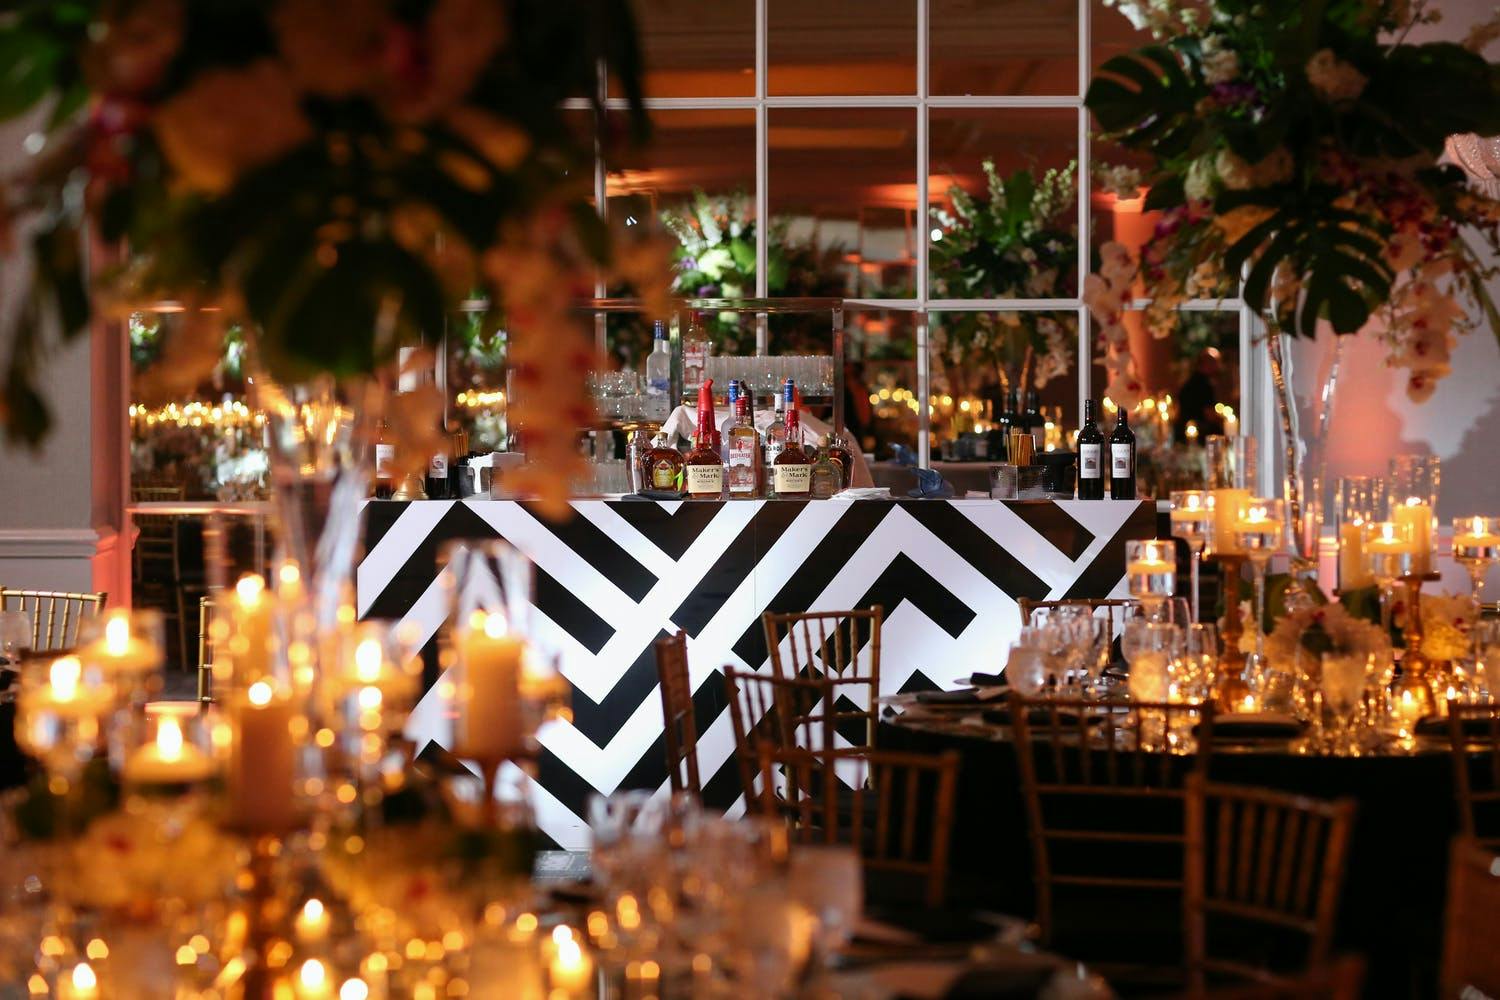 Wedding Reception With Black and White Art Deco-Style Bar Area and Tropical Décor | PartySlate